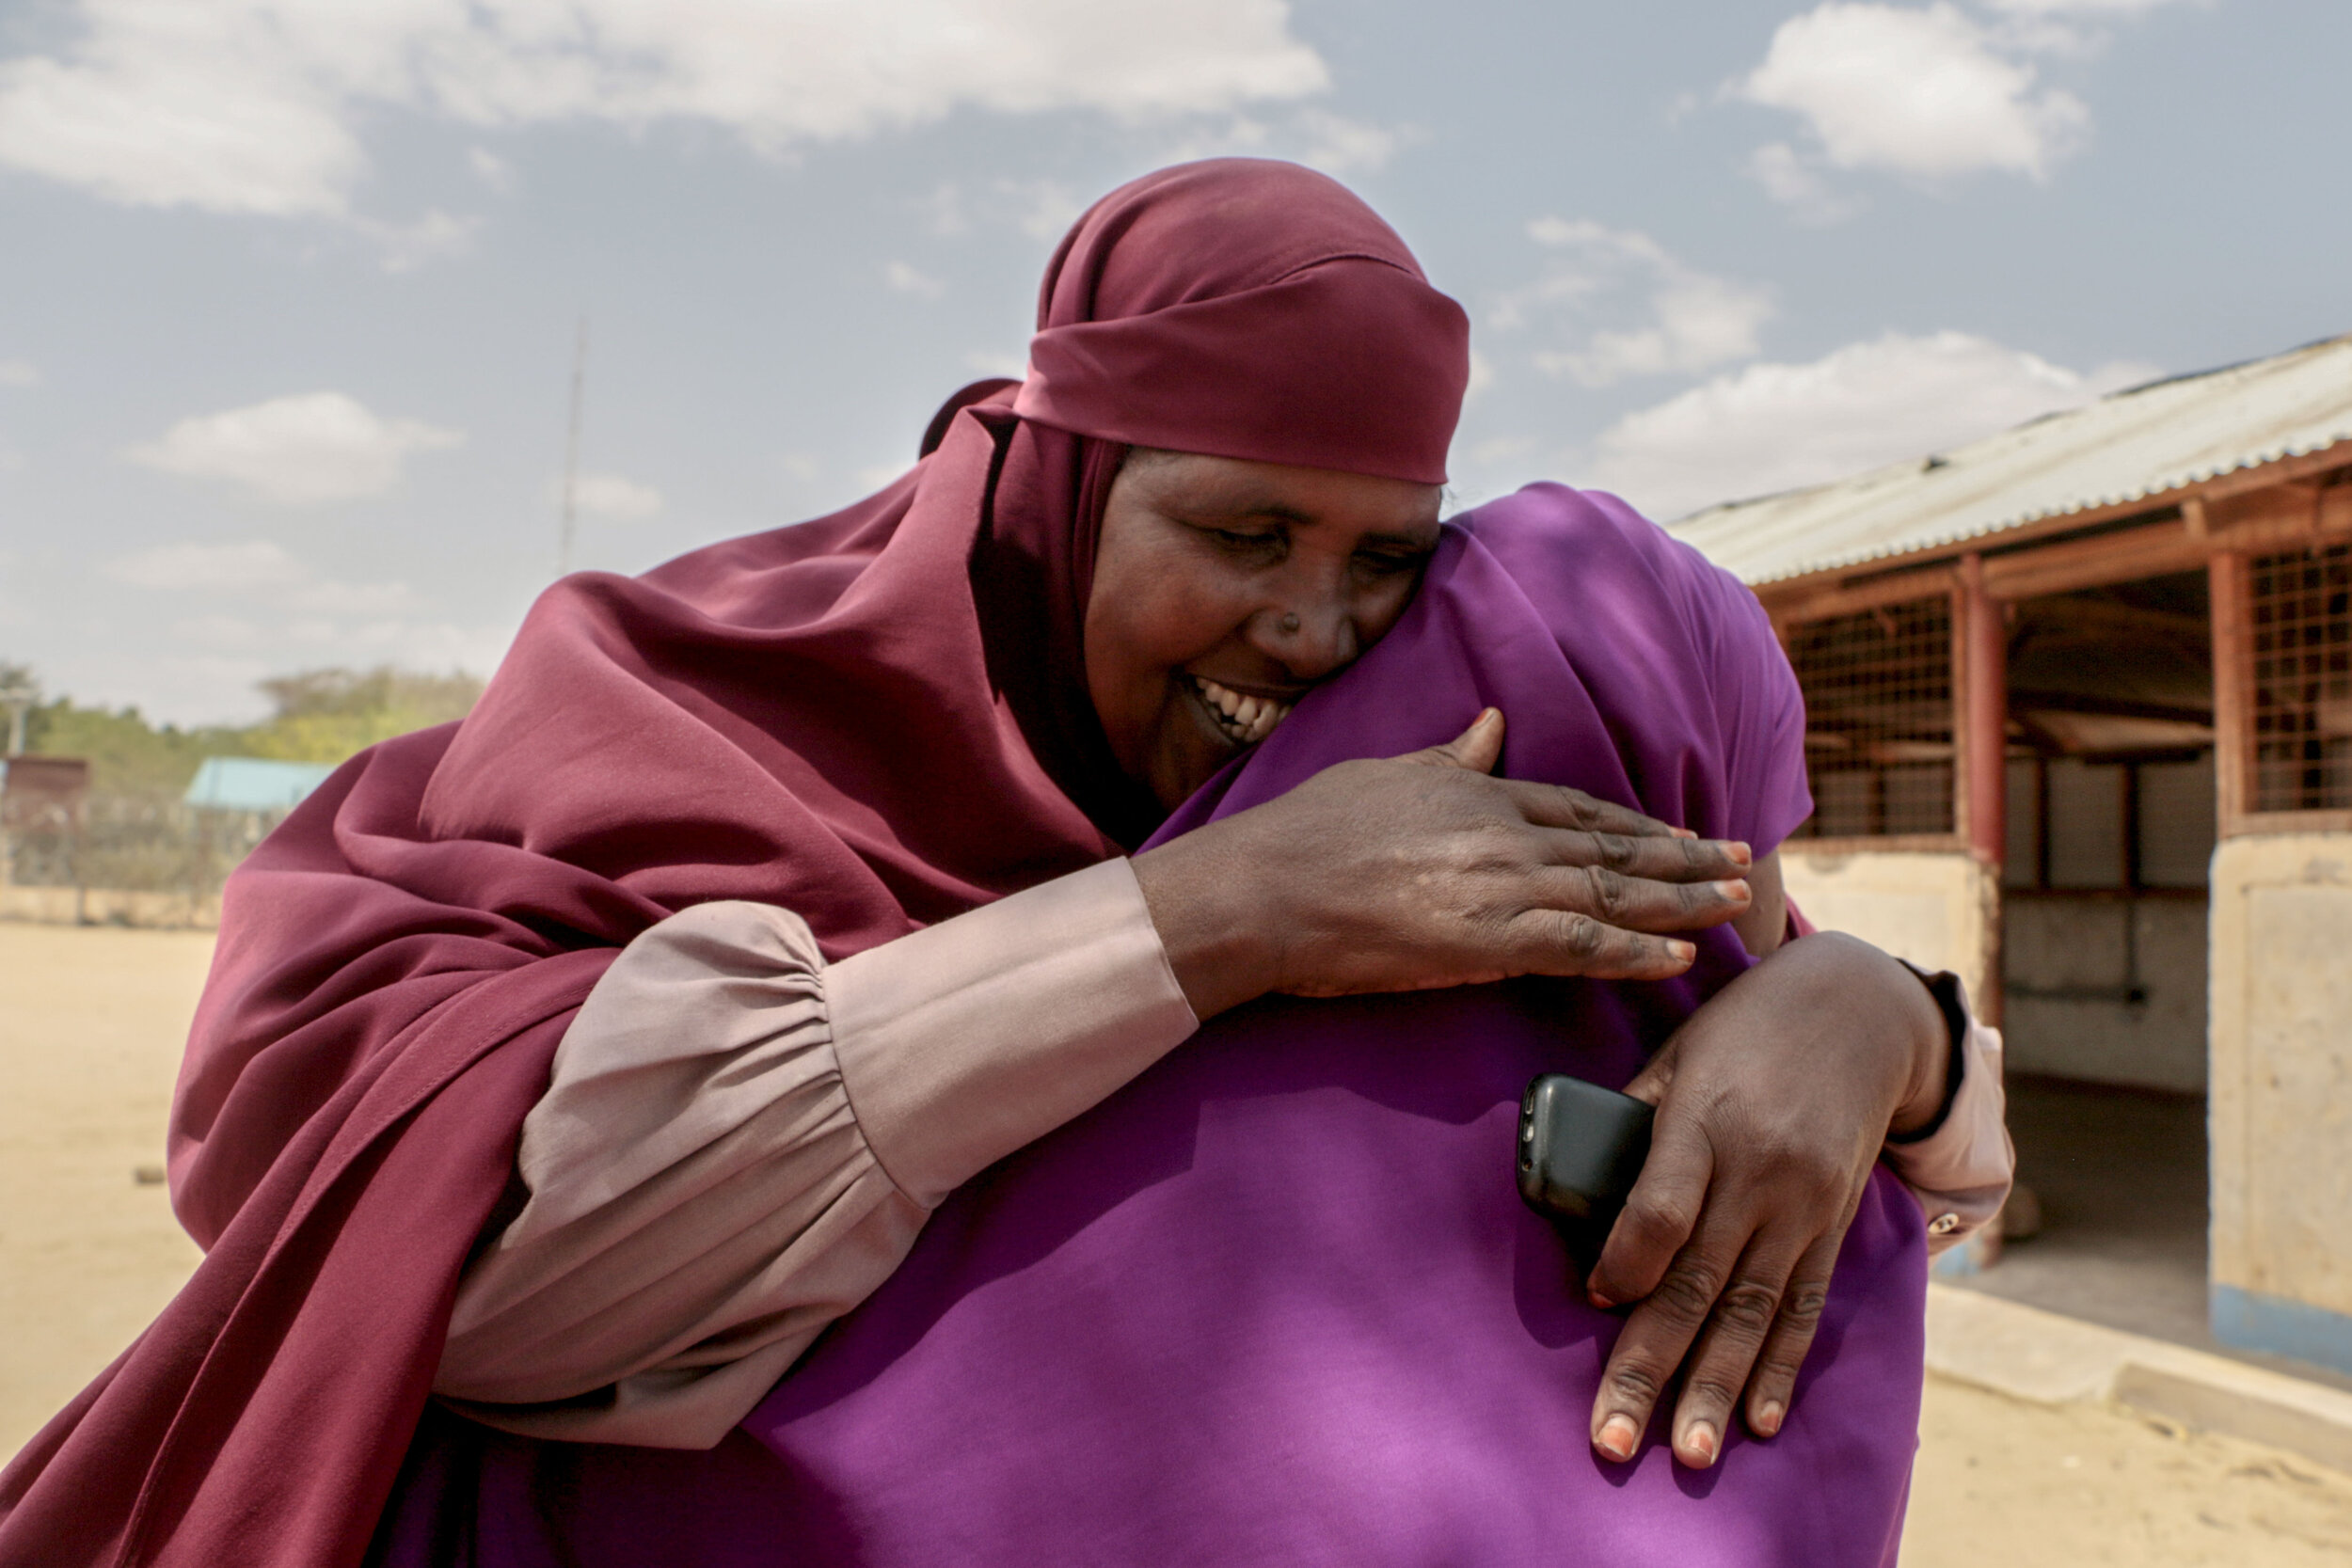  Ruqia Osman embraces Hamdi Kosar Aug. 19, 2019 at the Dagahaley Refugee Camp in Dadaab, Kenya. Osman has lived in the camp for around 30 years and went through the resettlement process with Kosar’s family nearly a decade ago. Her daughter, who she h